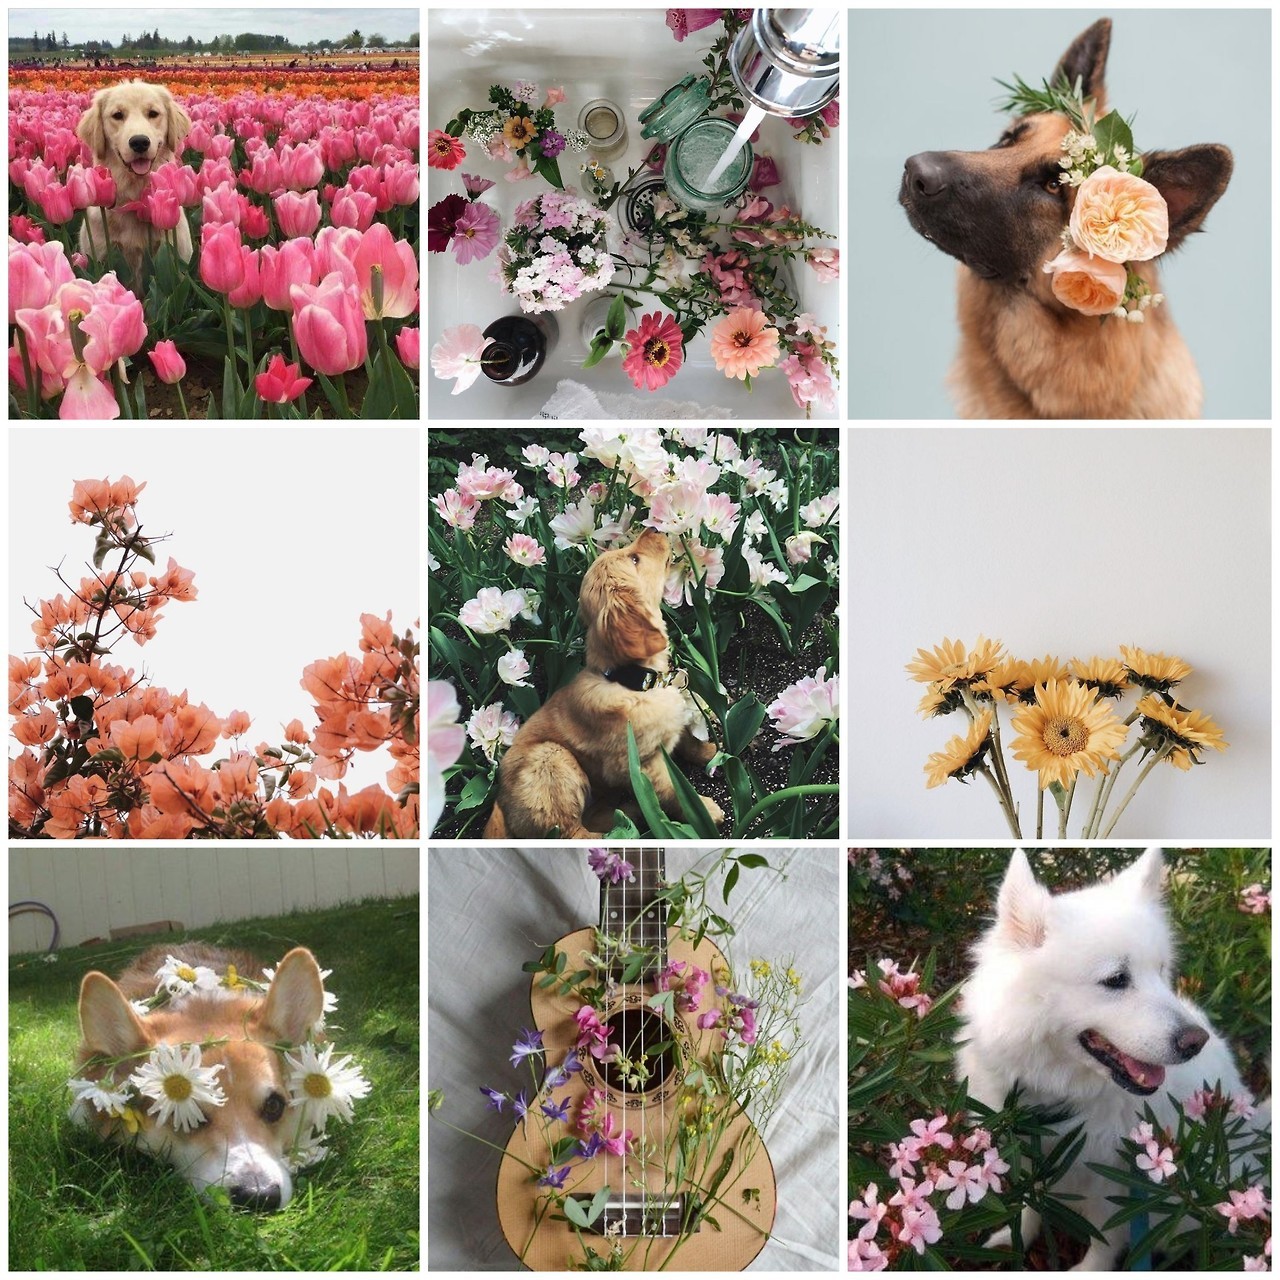 What started as a hobby — Dogs moodboard + flowers theme